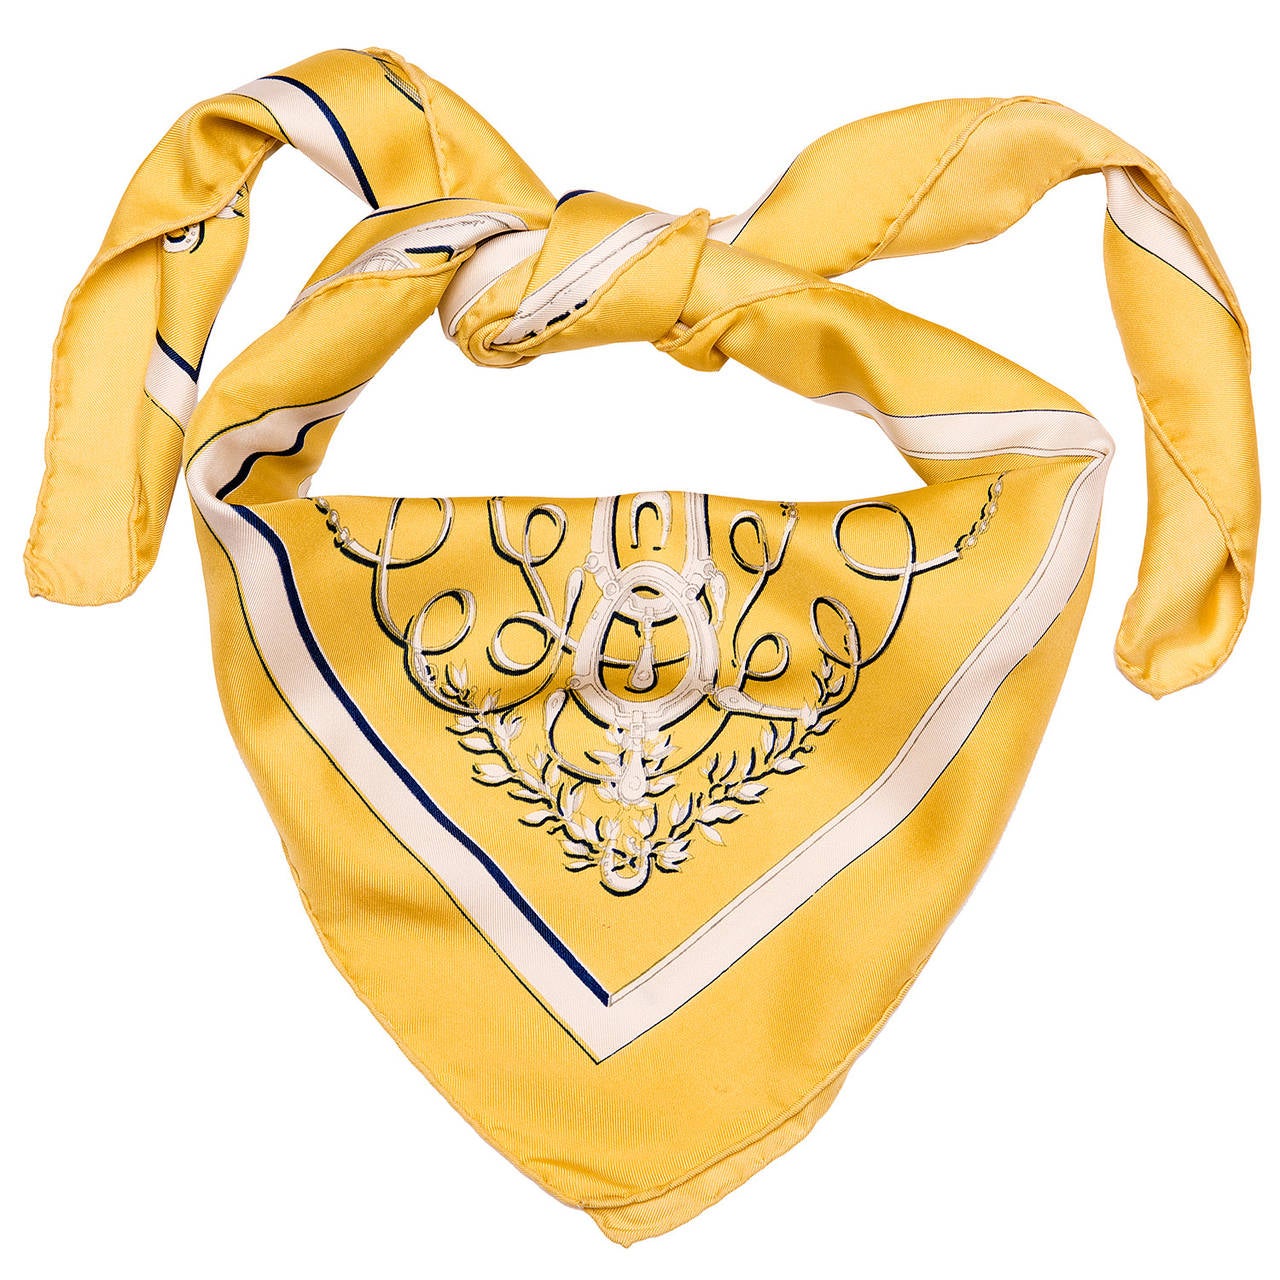 Real Spring/Summer look to this fabulous Hermes Silk Scarf buy the famous Hermes designer Henri Ledoux

FREE WORLDWIDE DELIVERY INCLUDED IN THE PRICE !